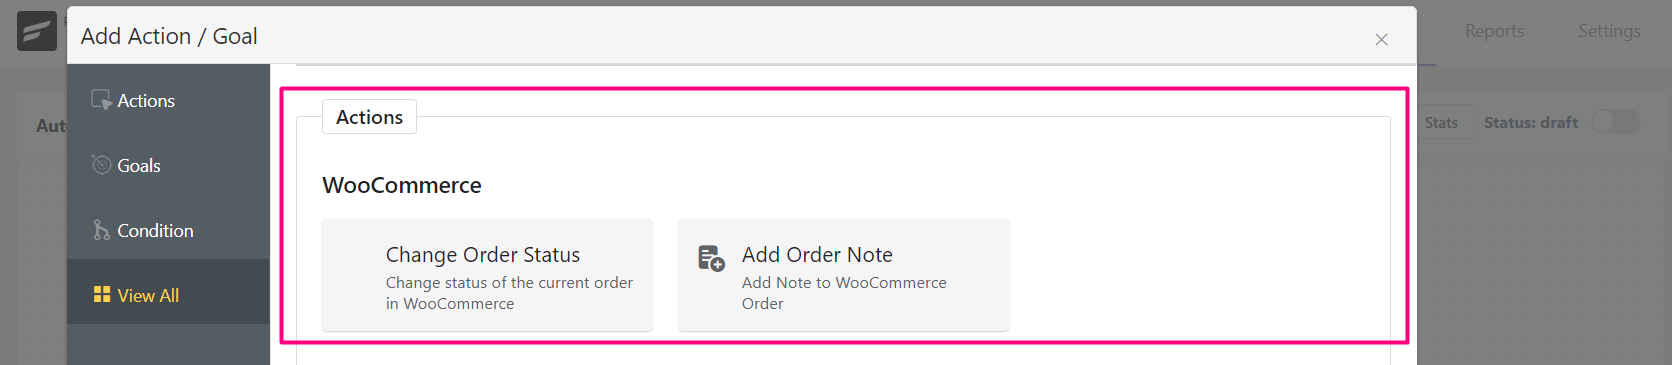 crm actions woocommerce